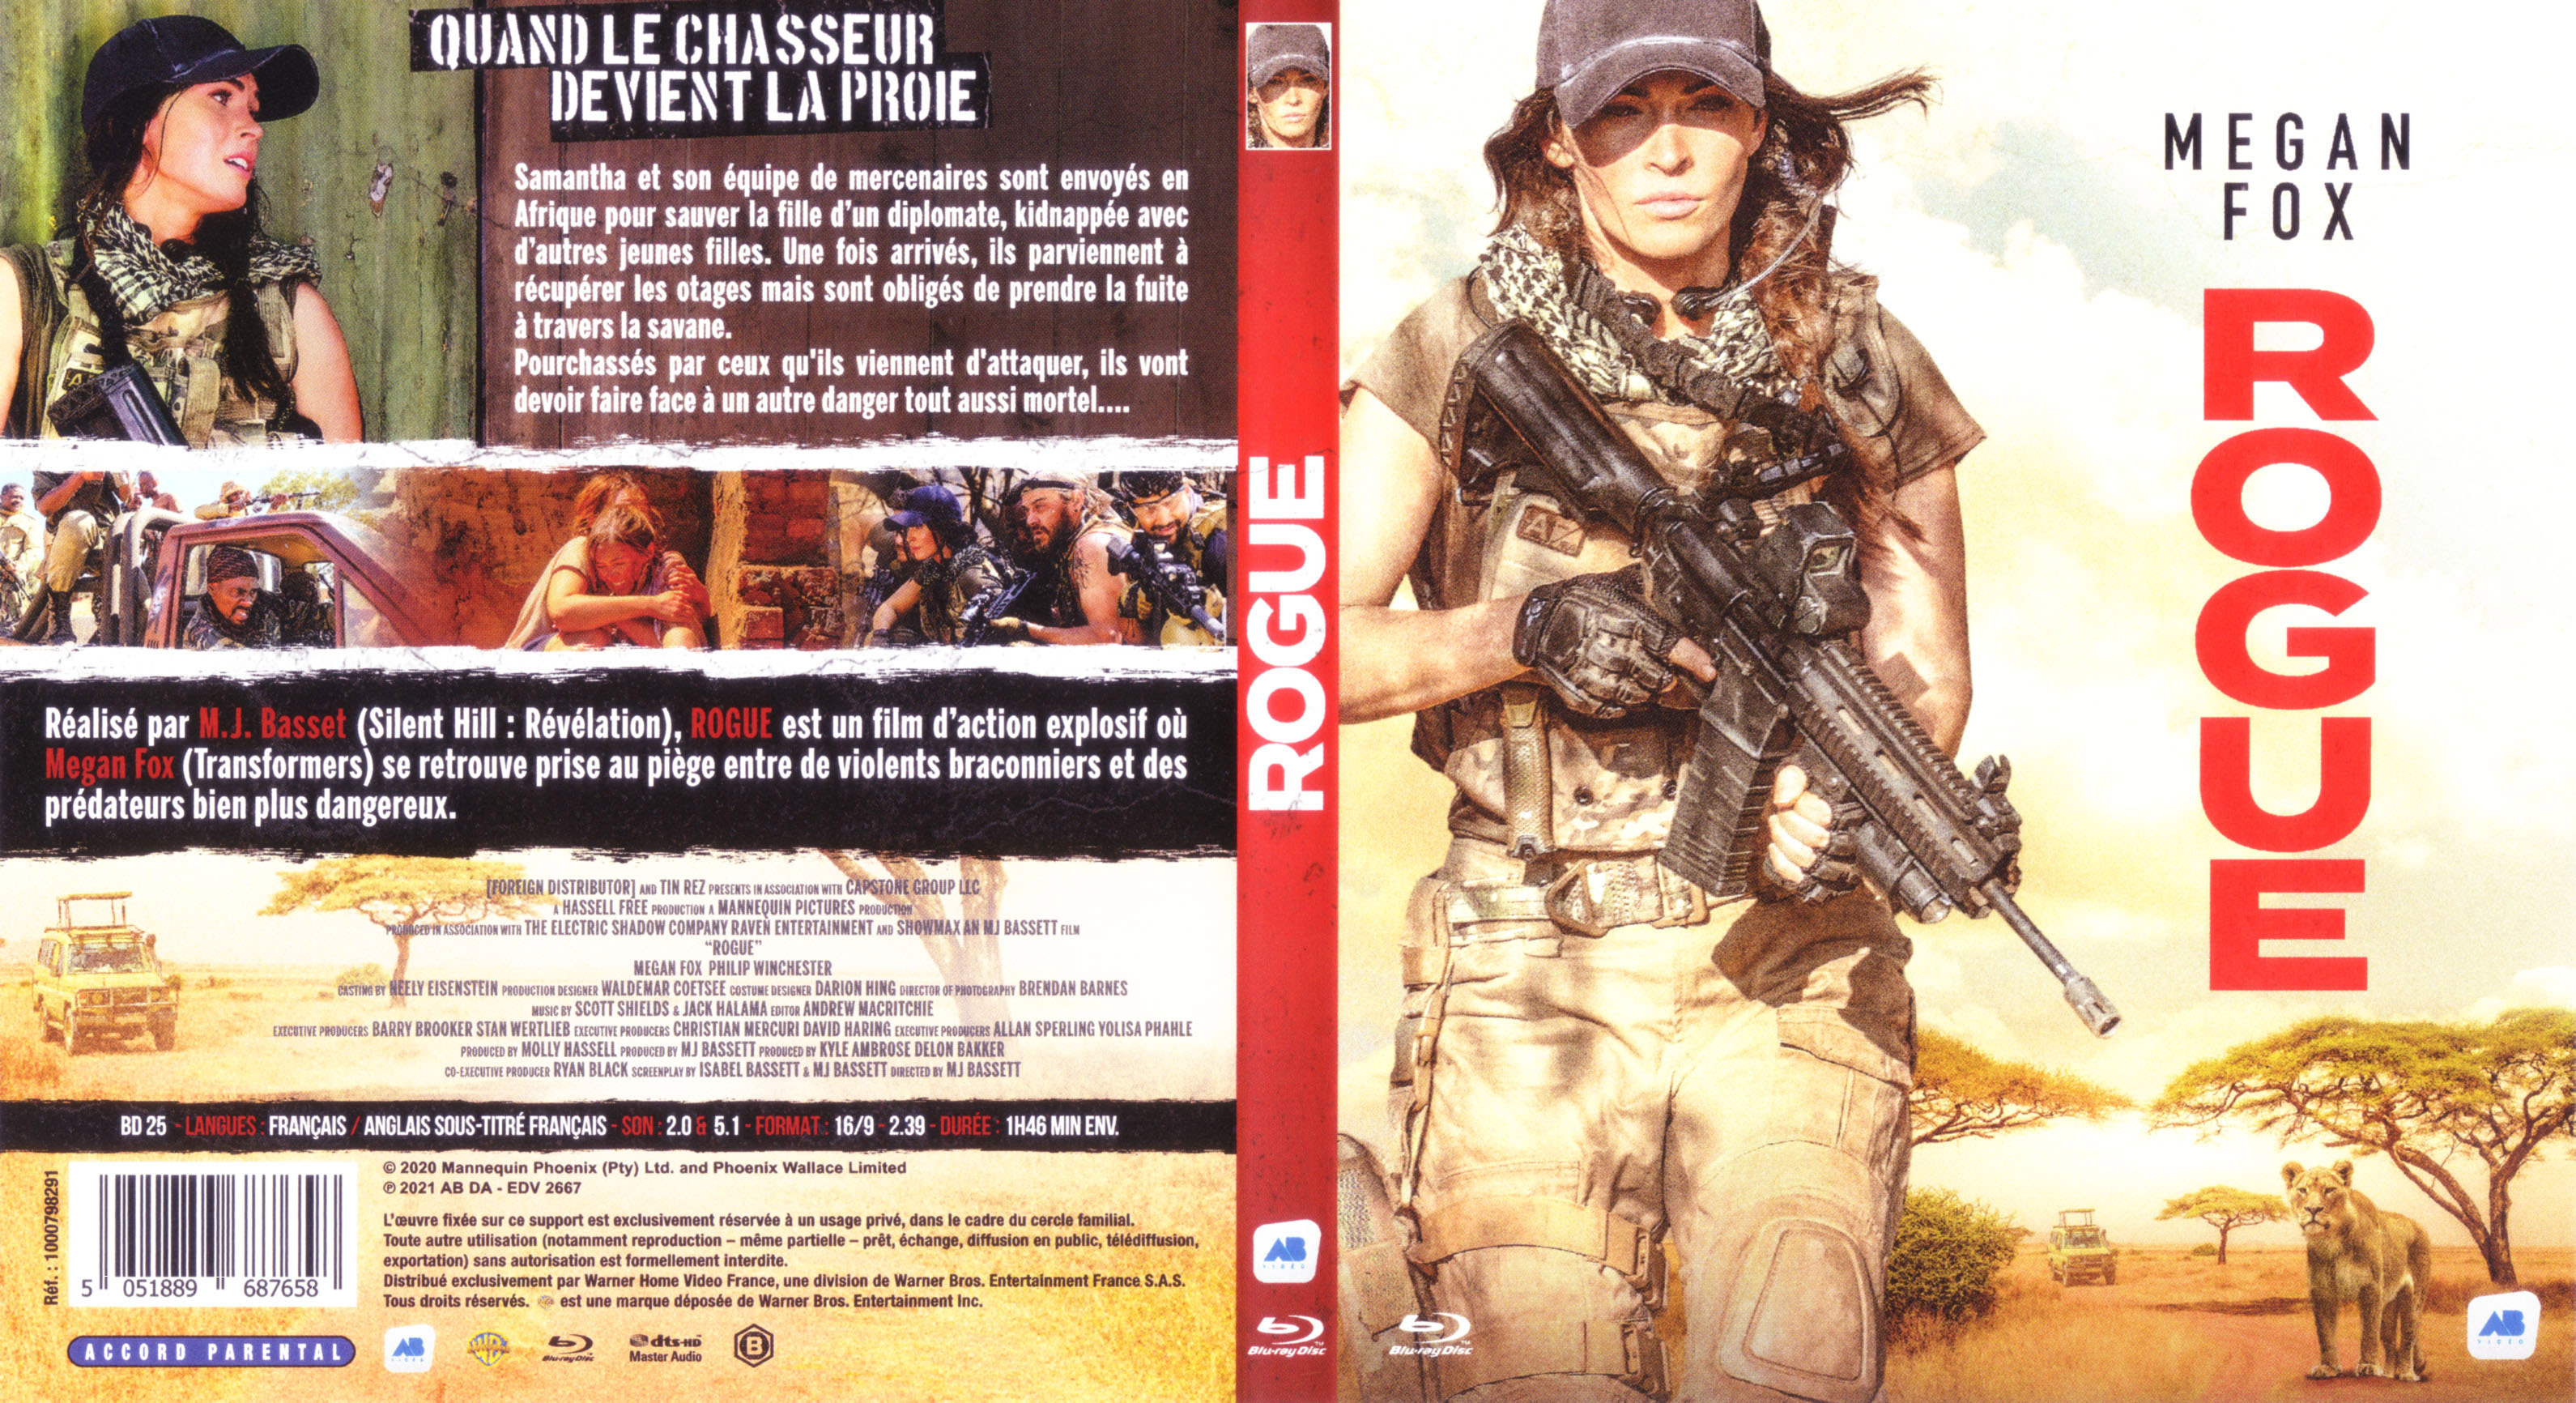 Jaquette DVD Rogue (2020) (BLU-RAY)